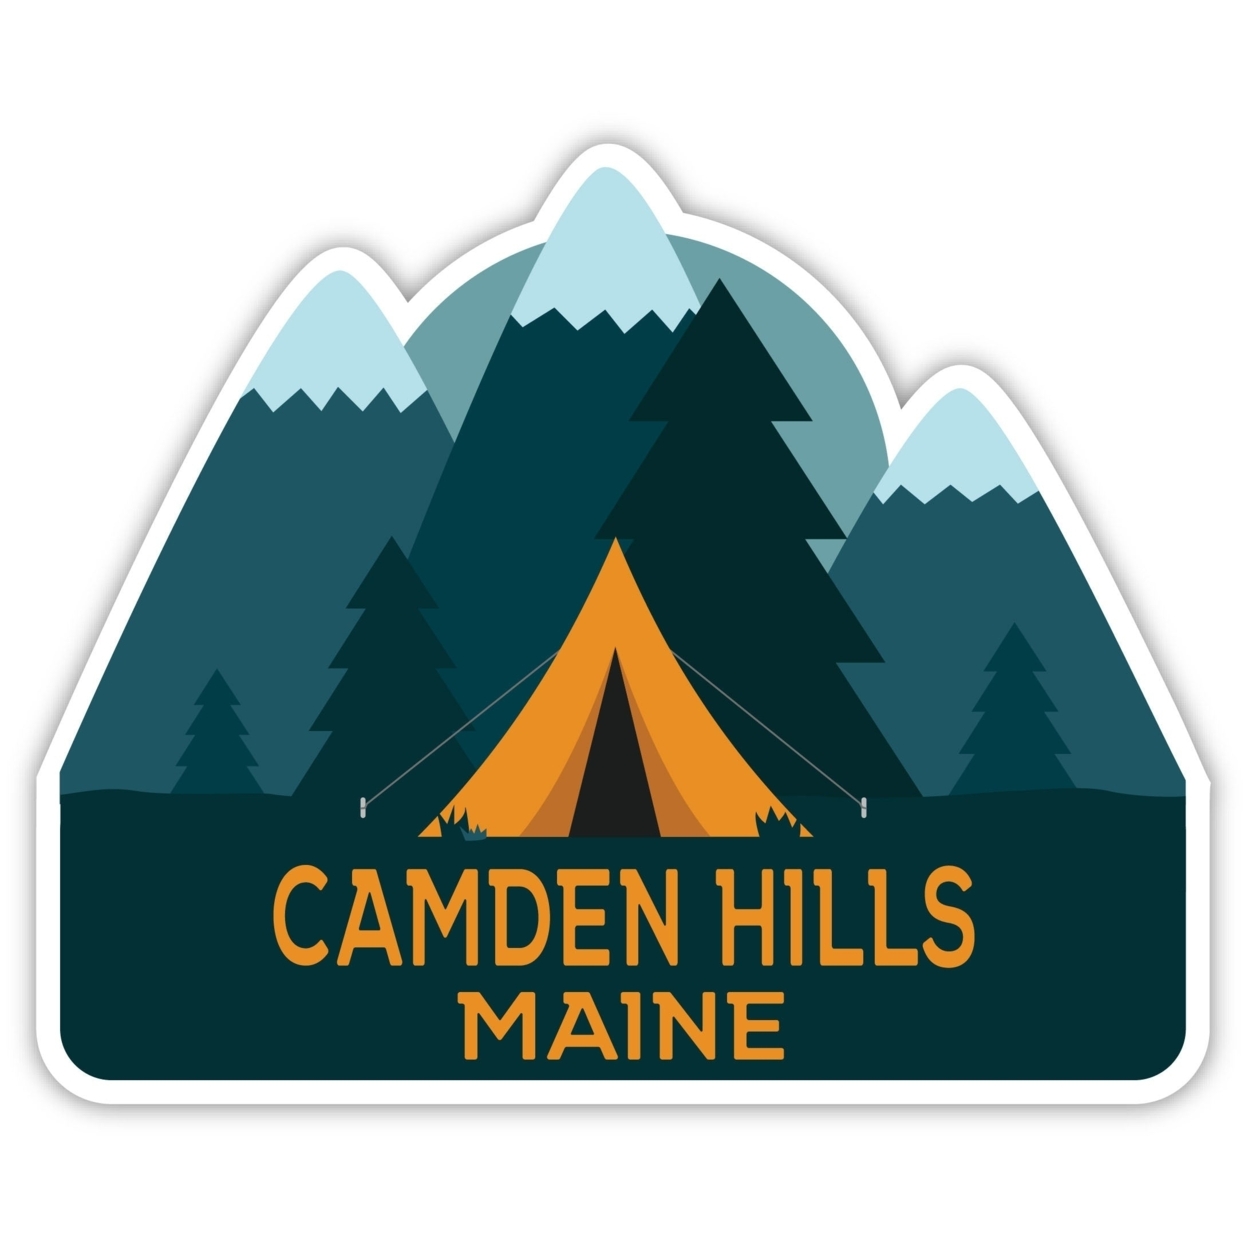 Camden Hills Maine Souvenir Decorative Stickers (Choose Theme And Size) - 4-Pack, 12-Inch, Tent